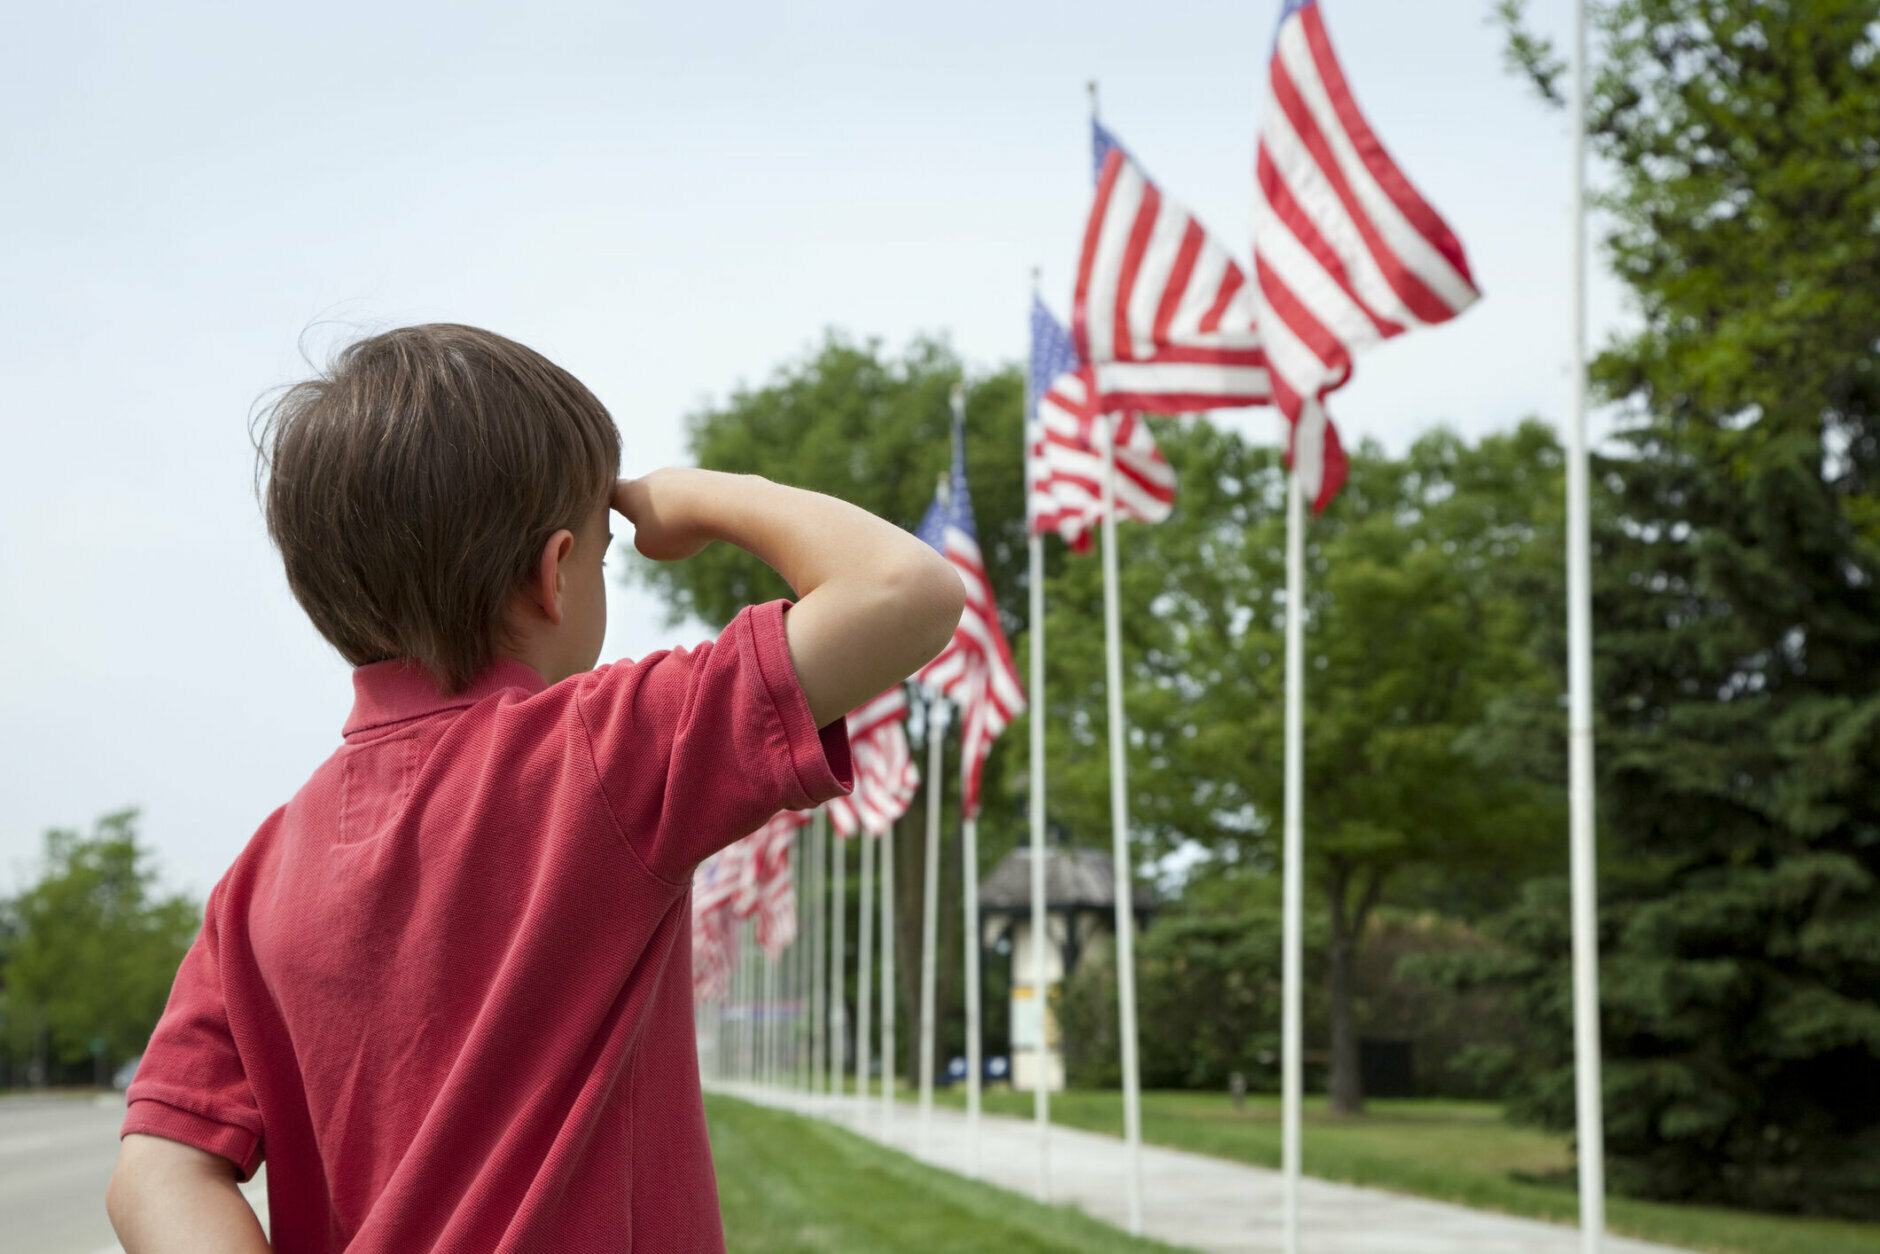 Young boy salutes flags of Memorial Day display in a small townOther images: